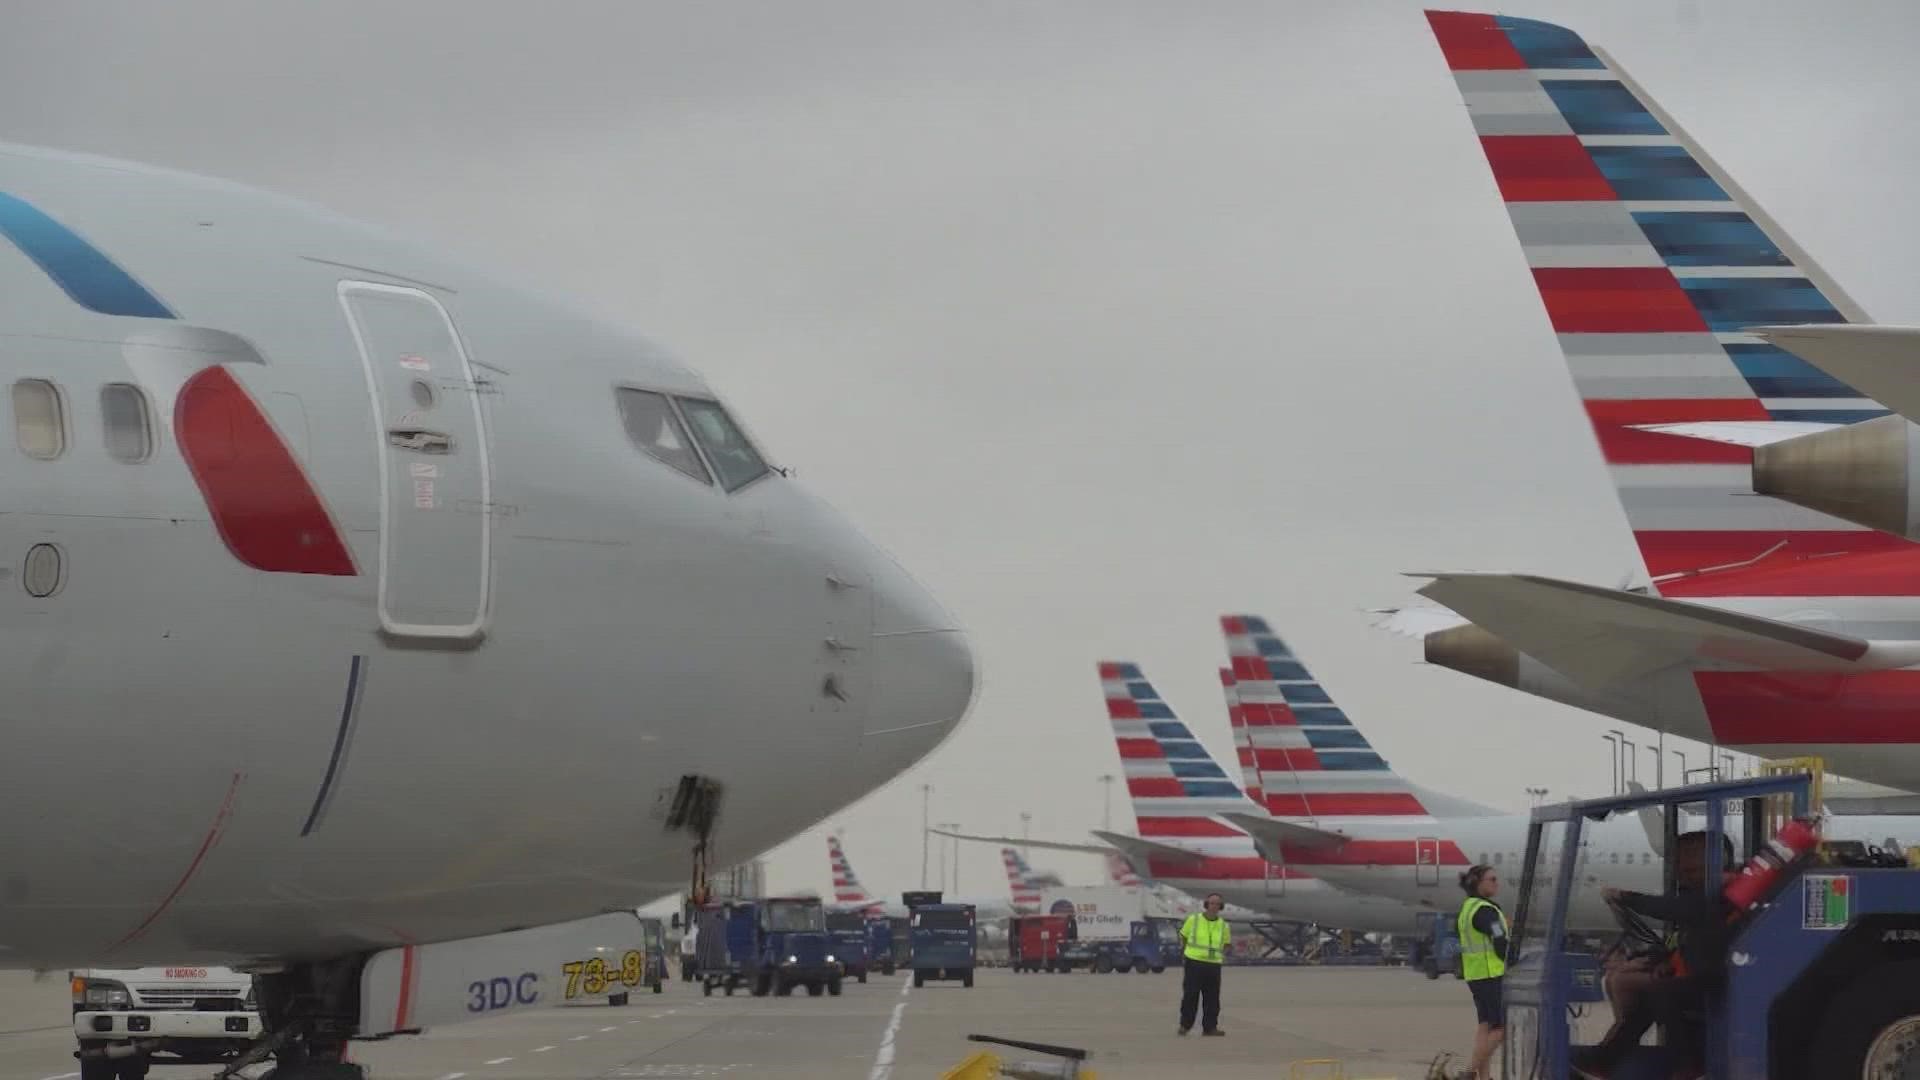 American Airlines says weather is affecting flights this week. But the airline's pilots union claims staffing issues are still the main problem.